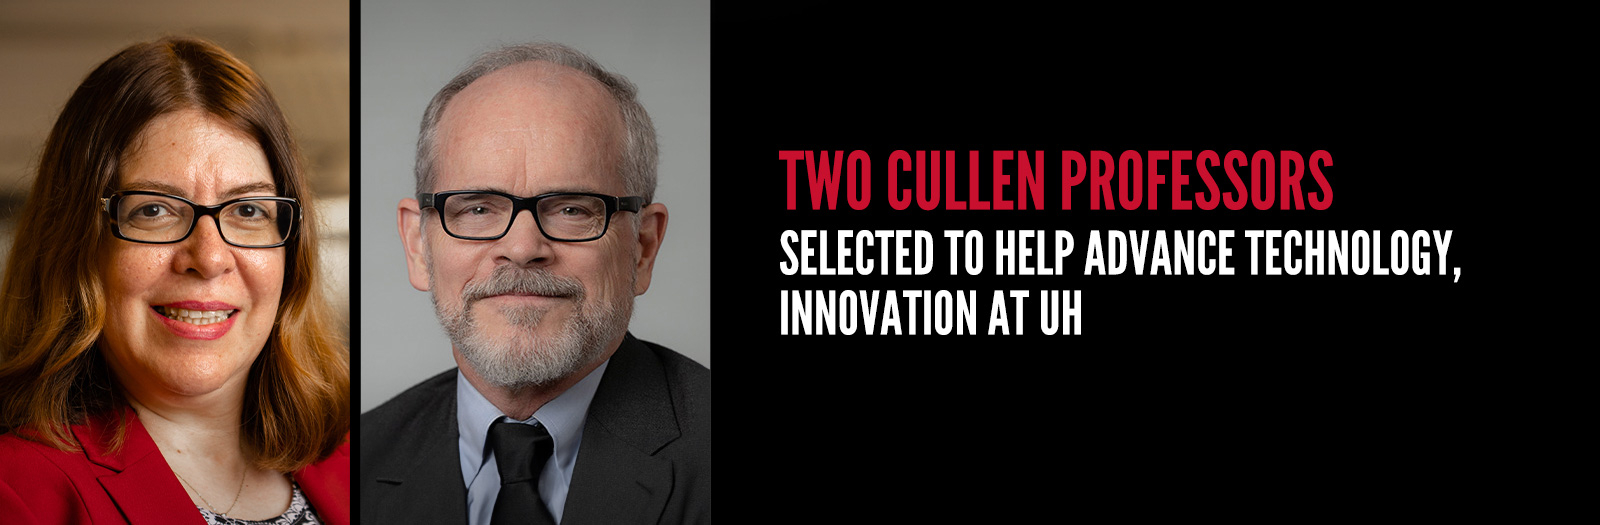 Two Cullen Professors Selected To Help Advance Technology, Innovation At UH